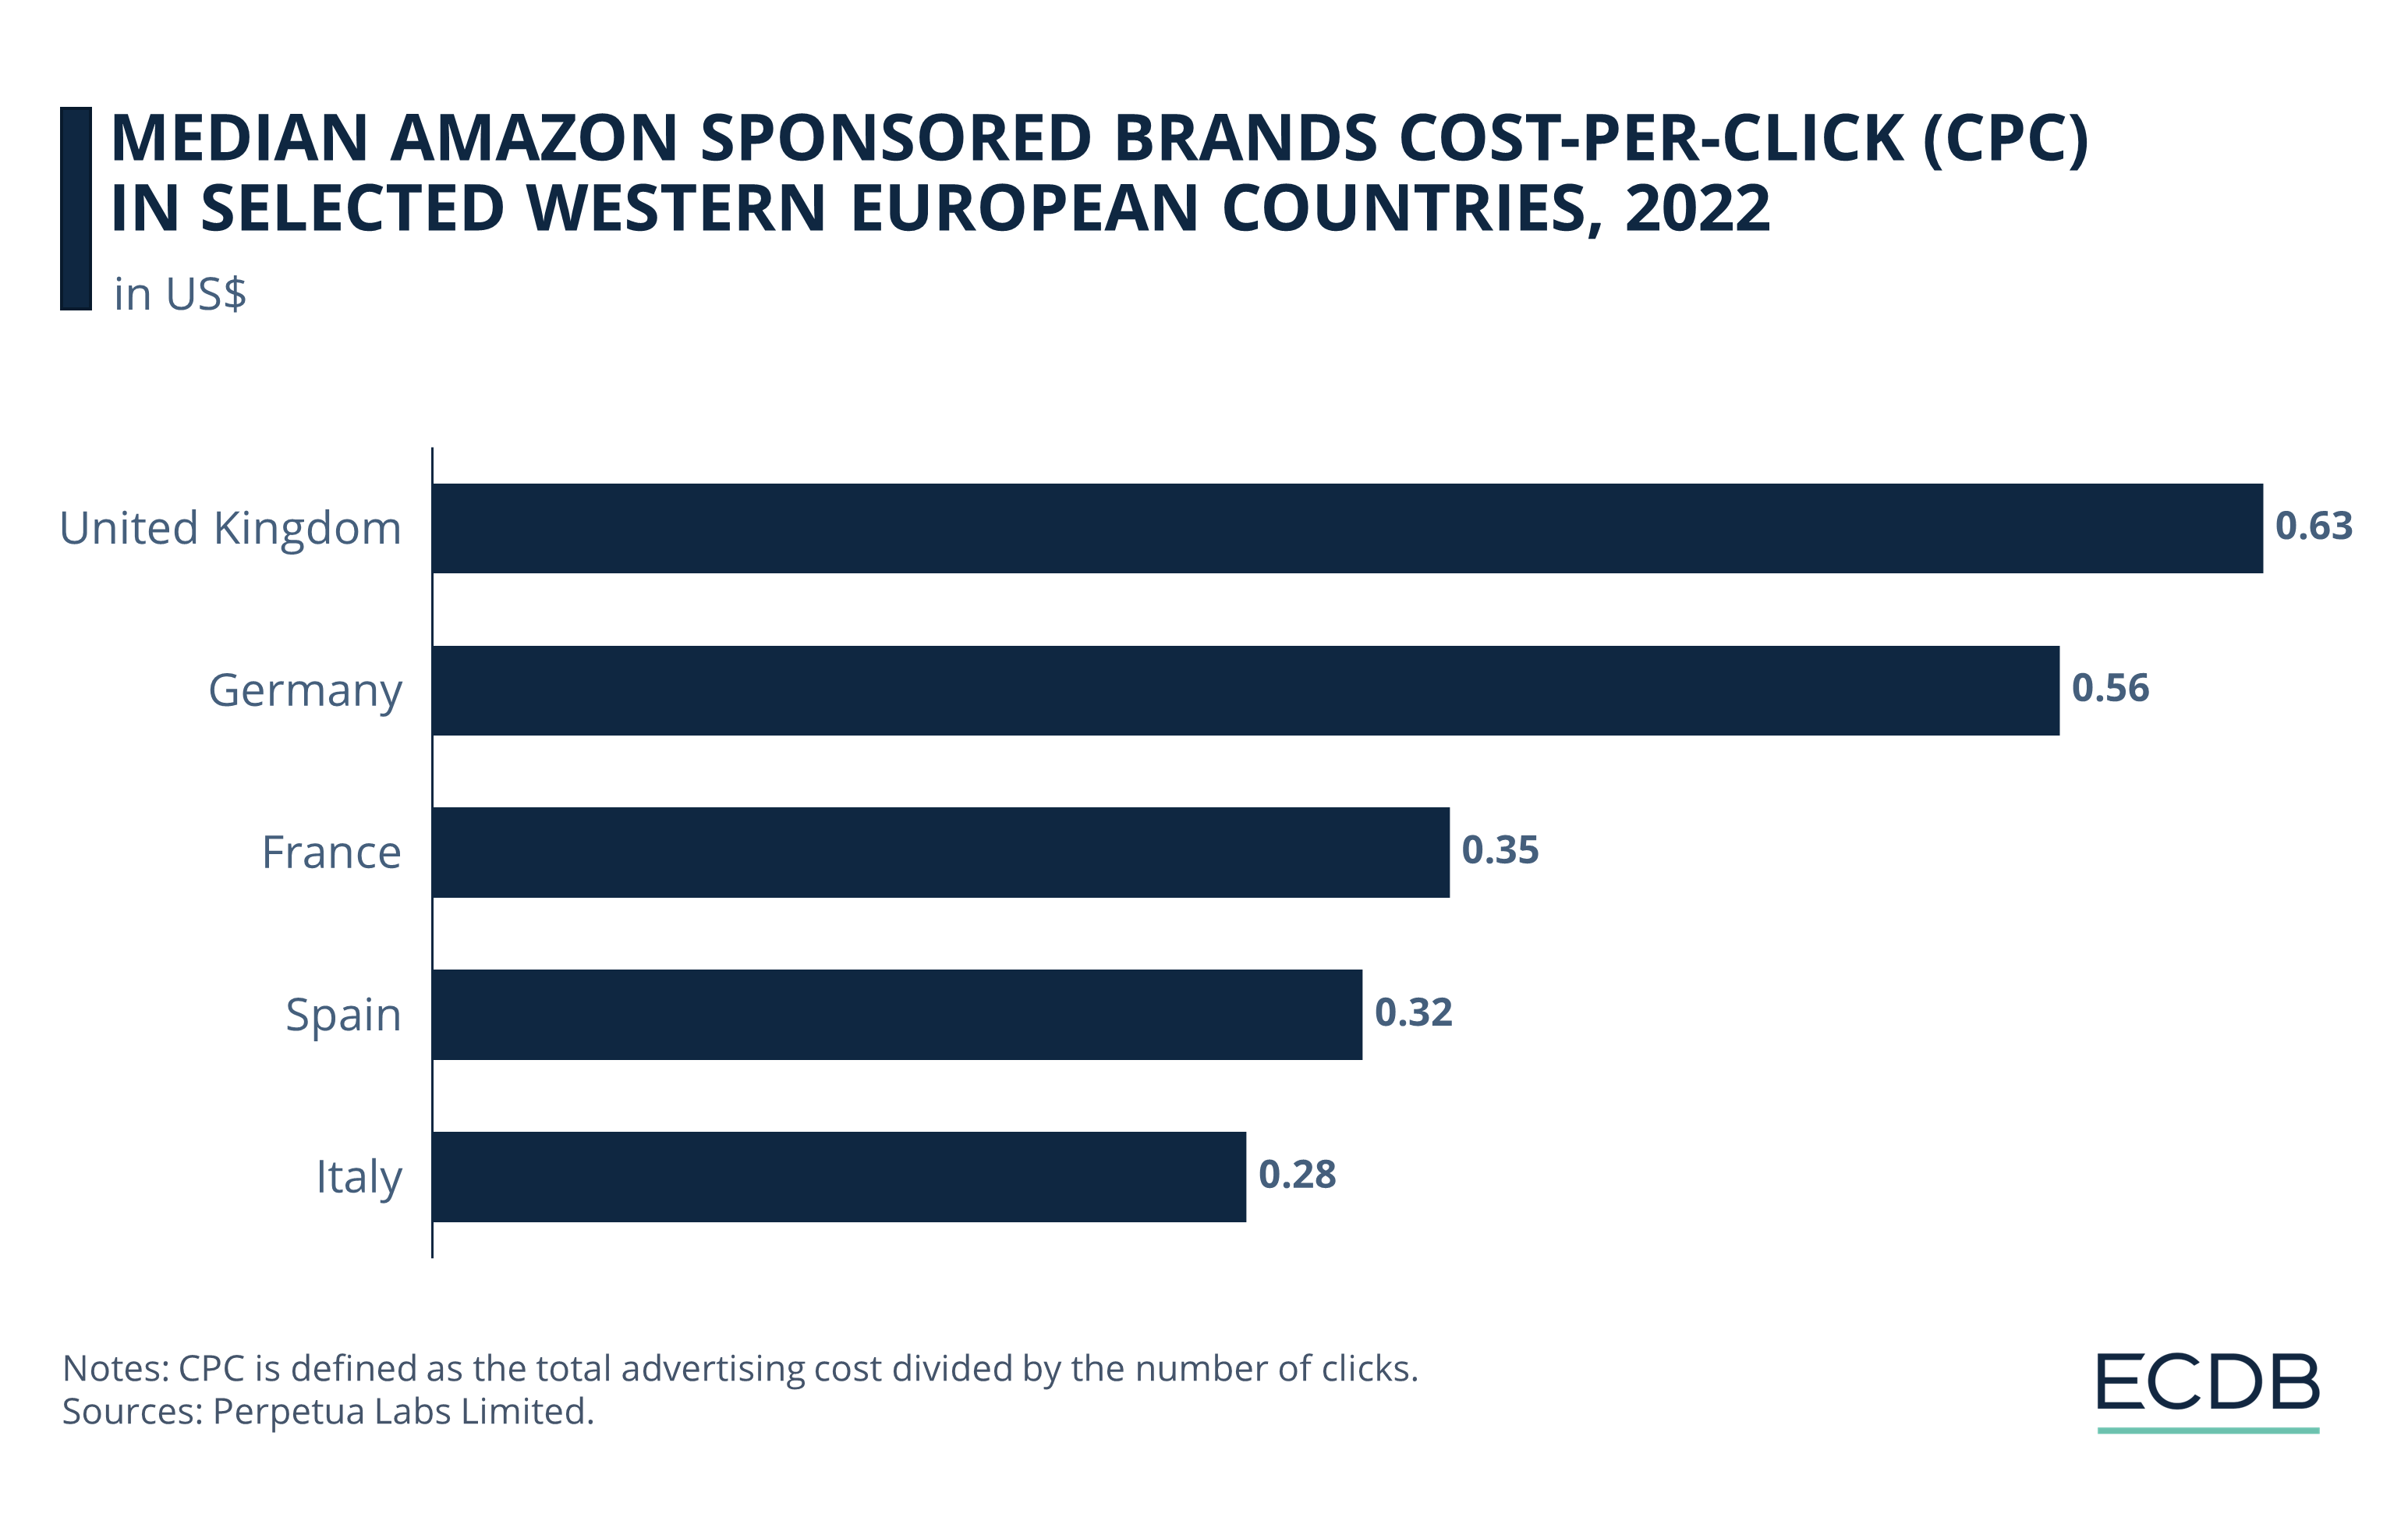 Amazon Median Sponsored Brands CPC in Selected Western European Countries, 2022